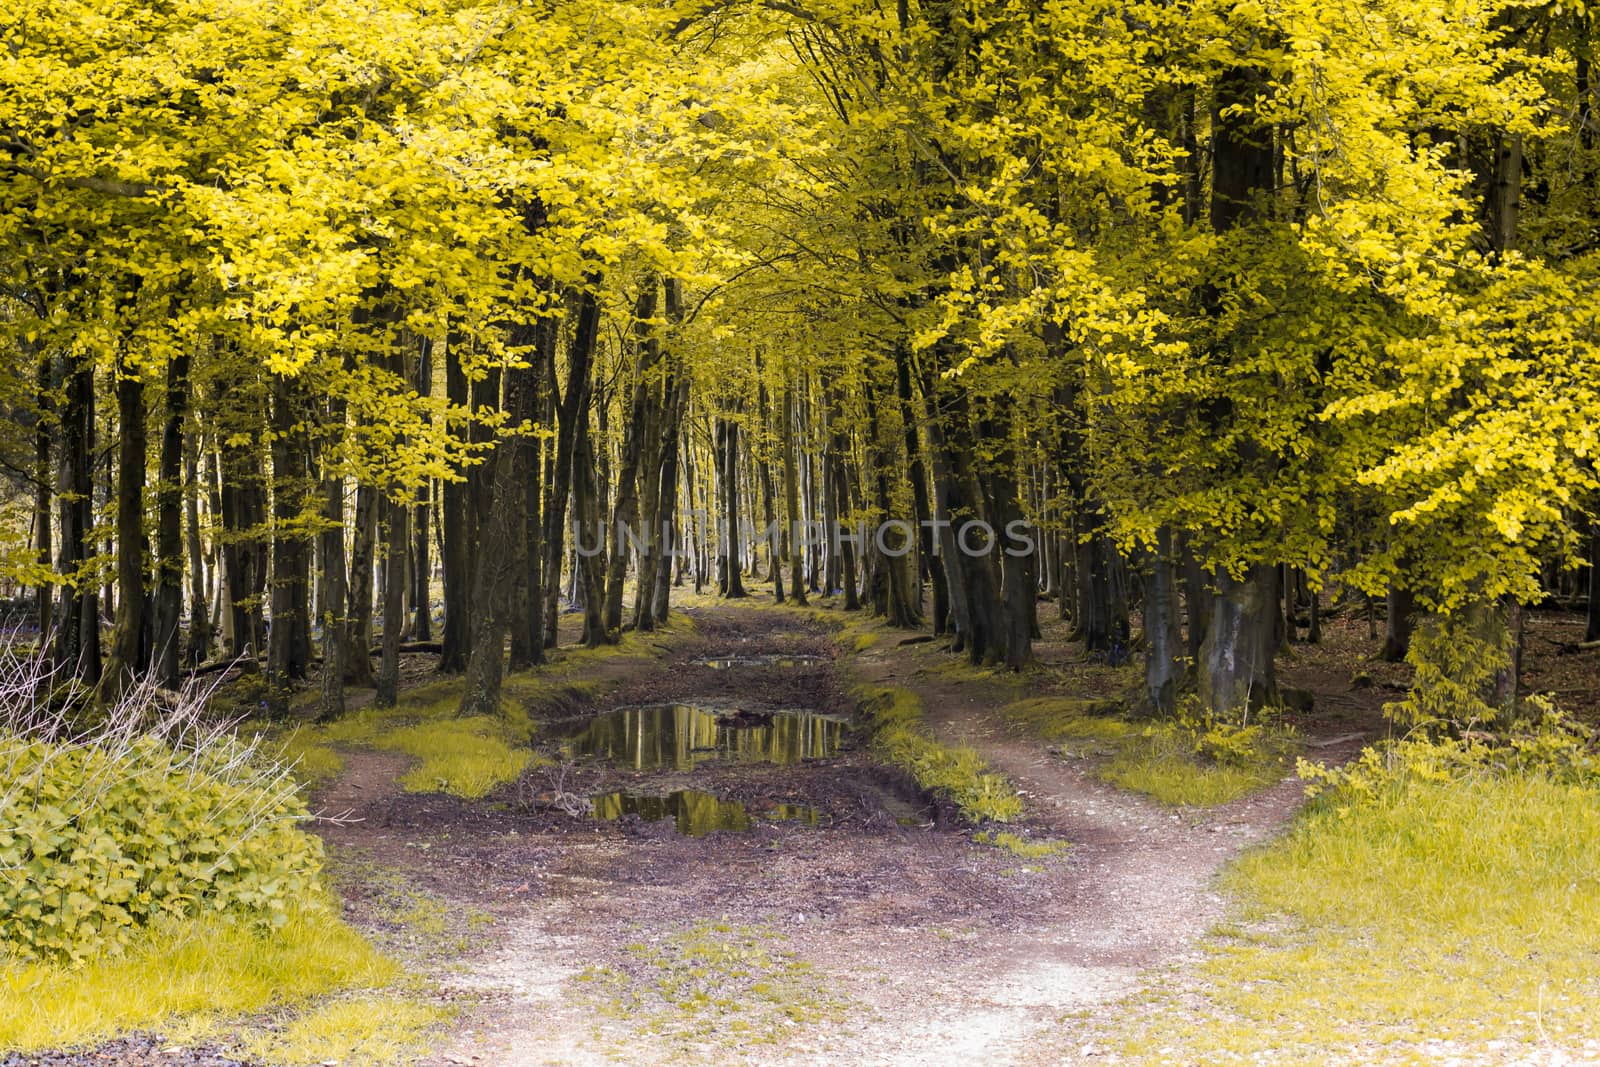 Thick woodland trees with yellow leaves with pool of water below them relecting